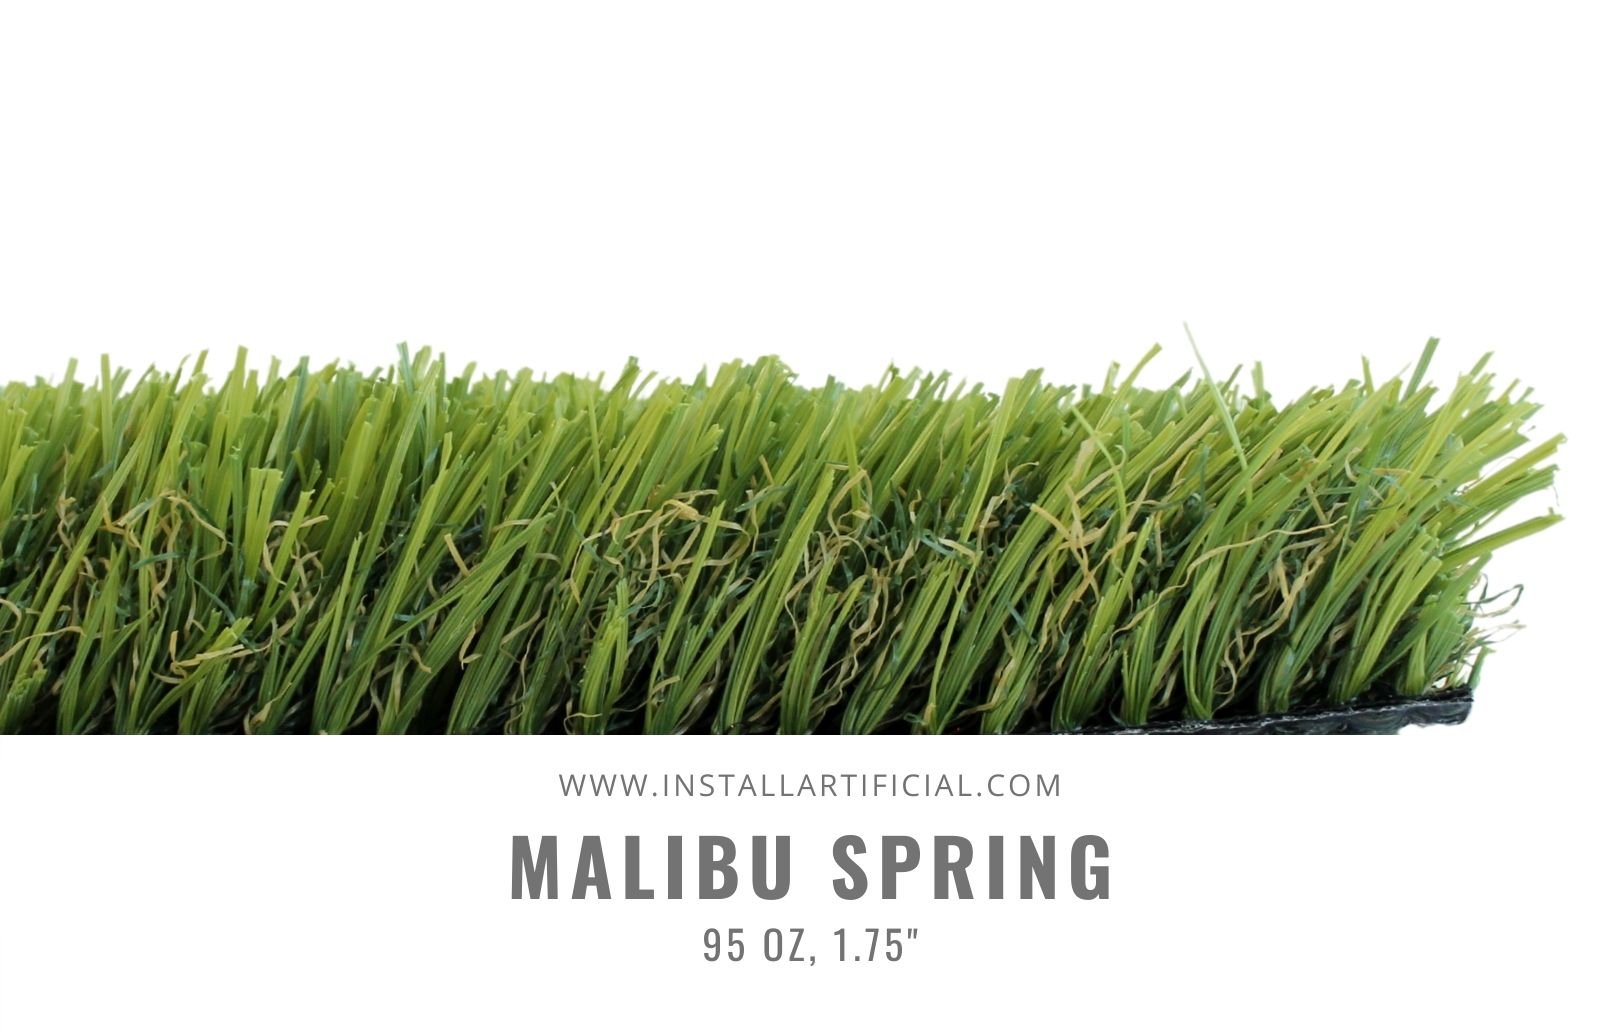 Malibu Spring, Synthetic Grass Warehouse, Everlast, side view